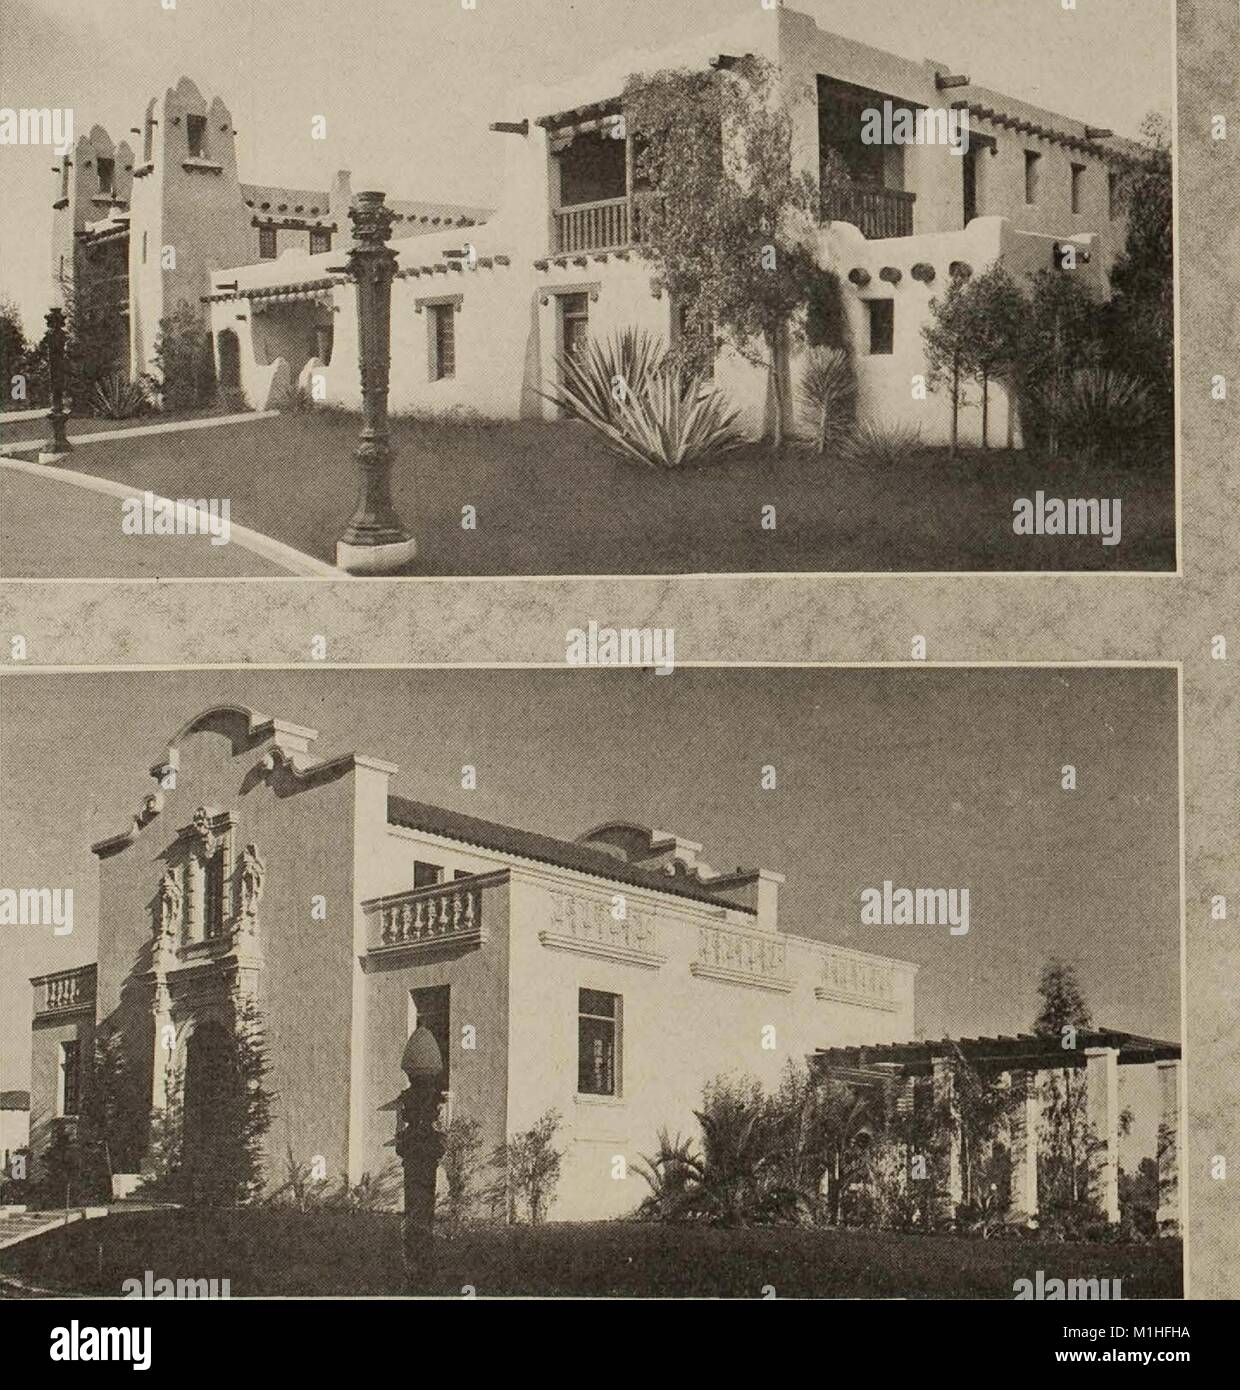 Two black and white photographs, part of a larger triptych, showing three buildings in the Spanish colonial style, shot from a three-quarter, low angle, and captioned 'Washington Building Montana Building New Mexico Building, ' from the volume 'The Official Guide Book of the Panama-California Exposition San Diego 1915', 1915. Courtesy Internet Archive. () Stock Photo